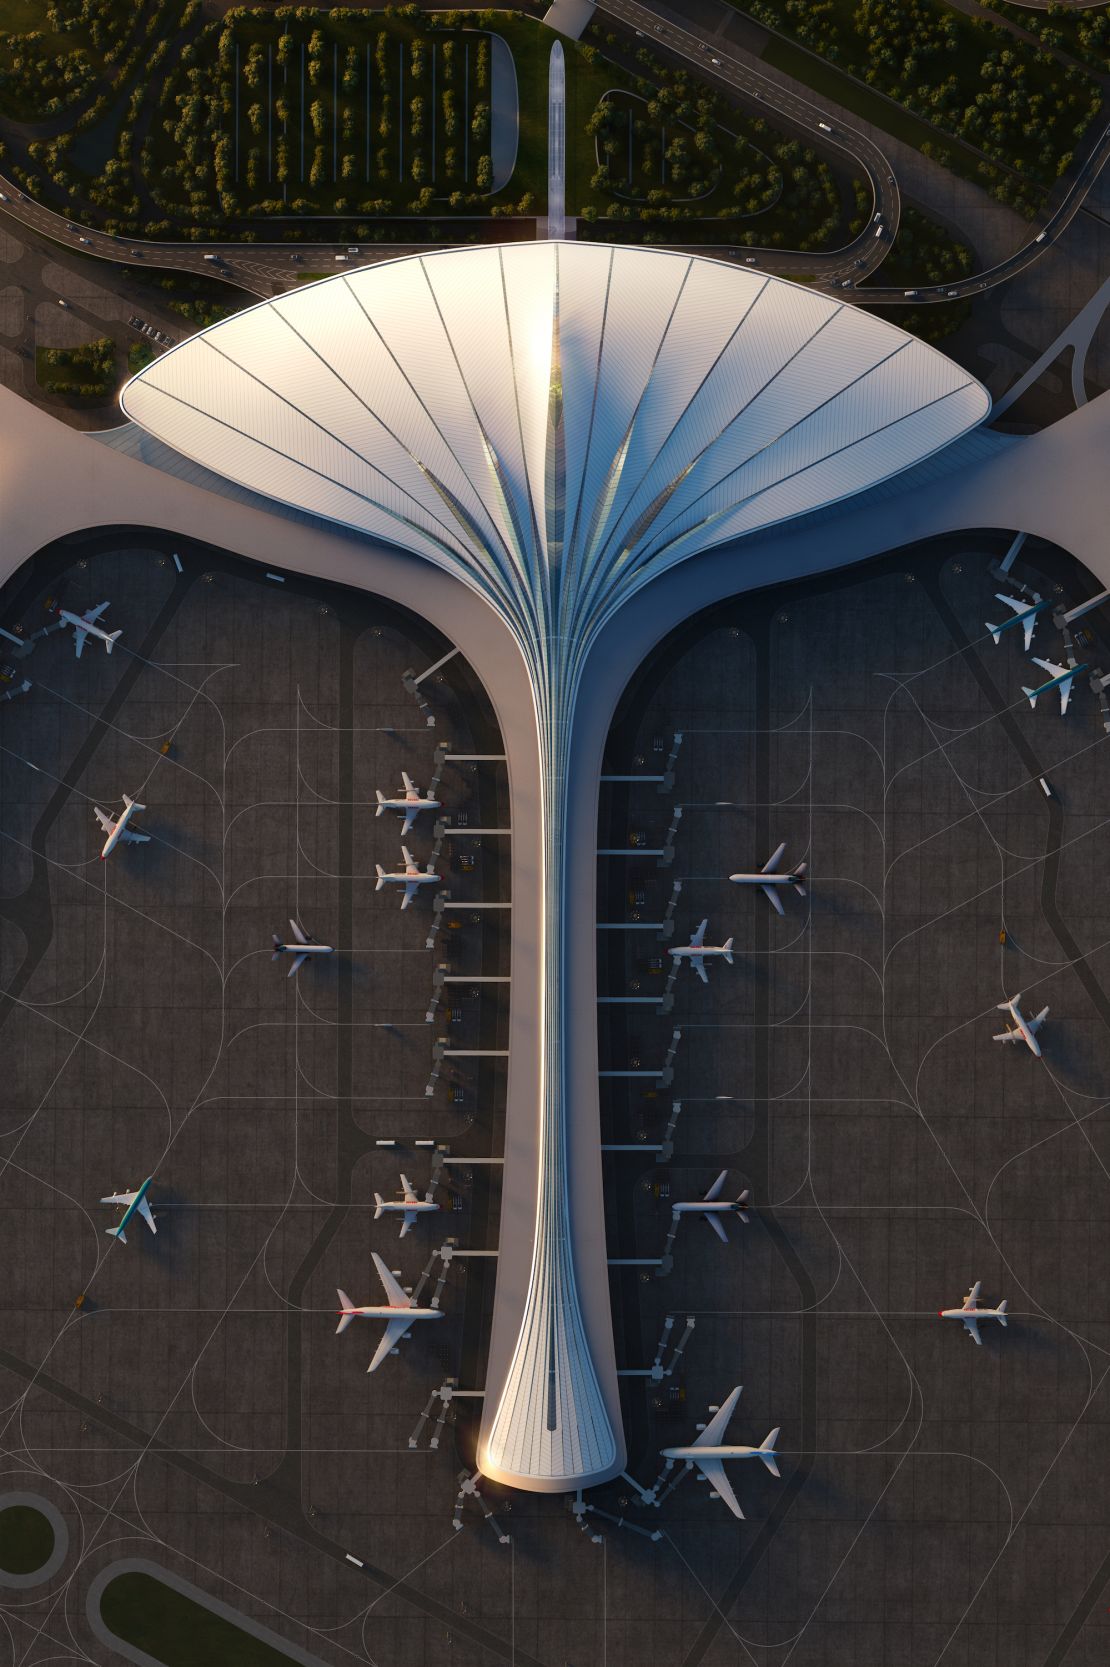 MAD Architects says the feather inspiration is a nod to the airplanes that will ascend and descend from the airport each day.  